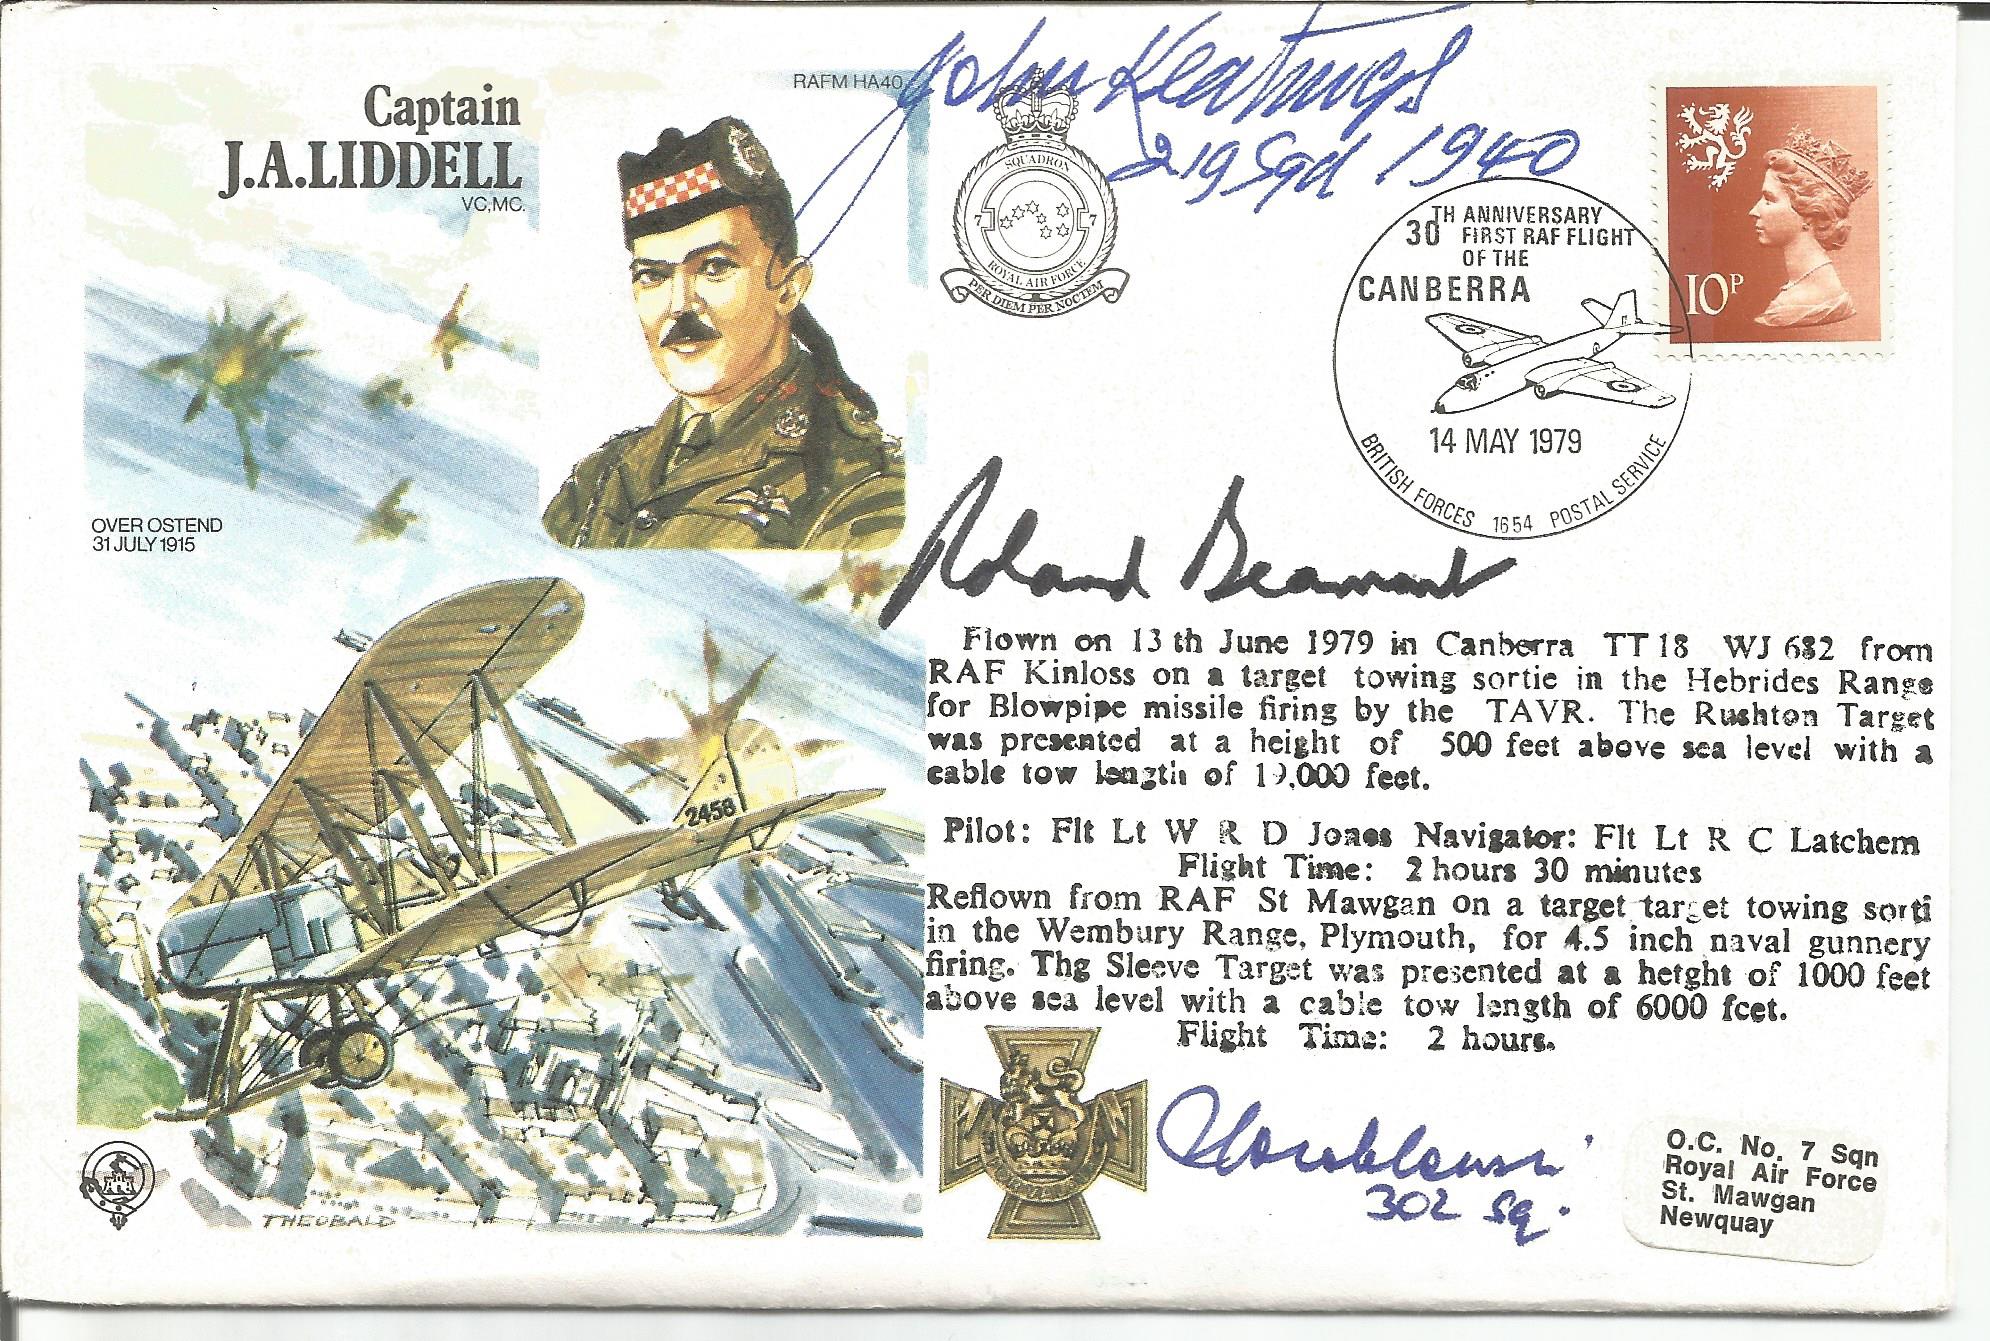 BOB aces signed cover Capt Liddell VC HA 40 signed R. Beamont, Z T A Wroblewski, J Keatings, all